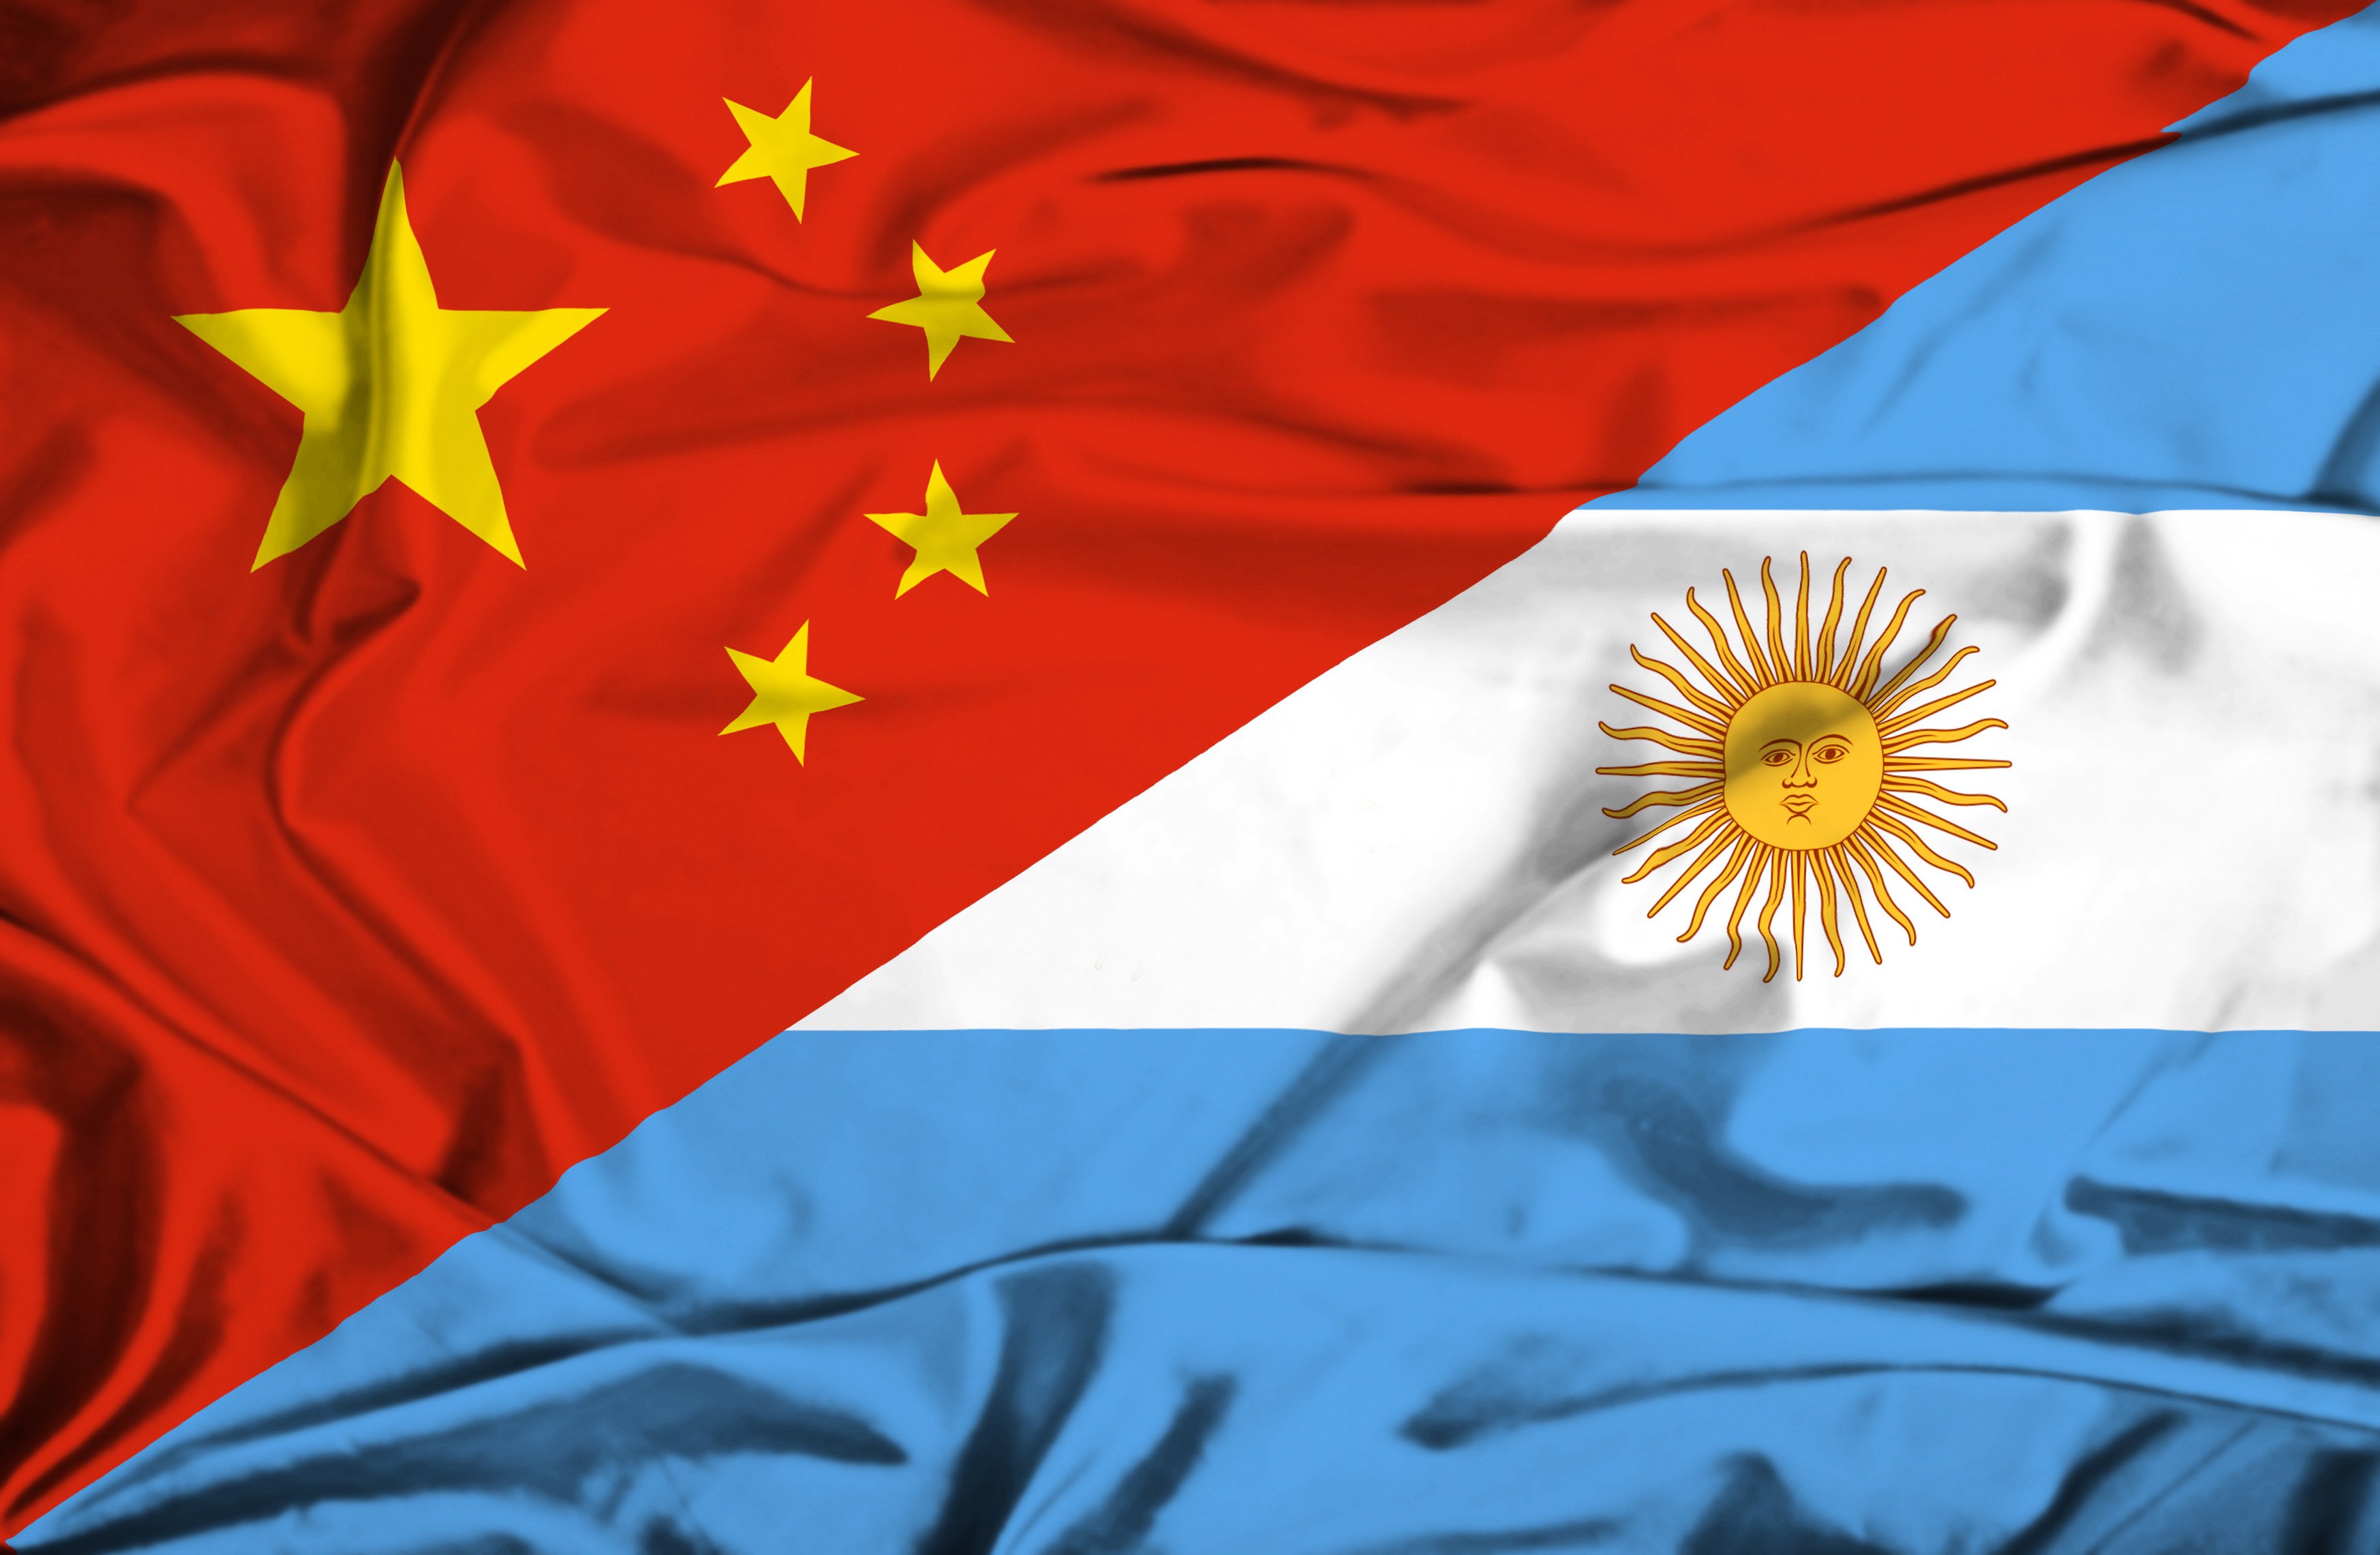 China has reportedly suspended US$6.5 billion in credit swaps to Argentina, just as a new president takes charge in Buenos Aires. Image: Shutterstock